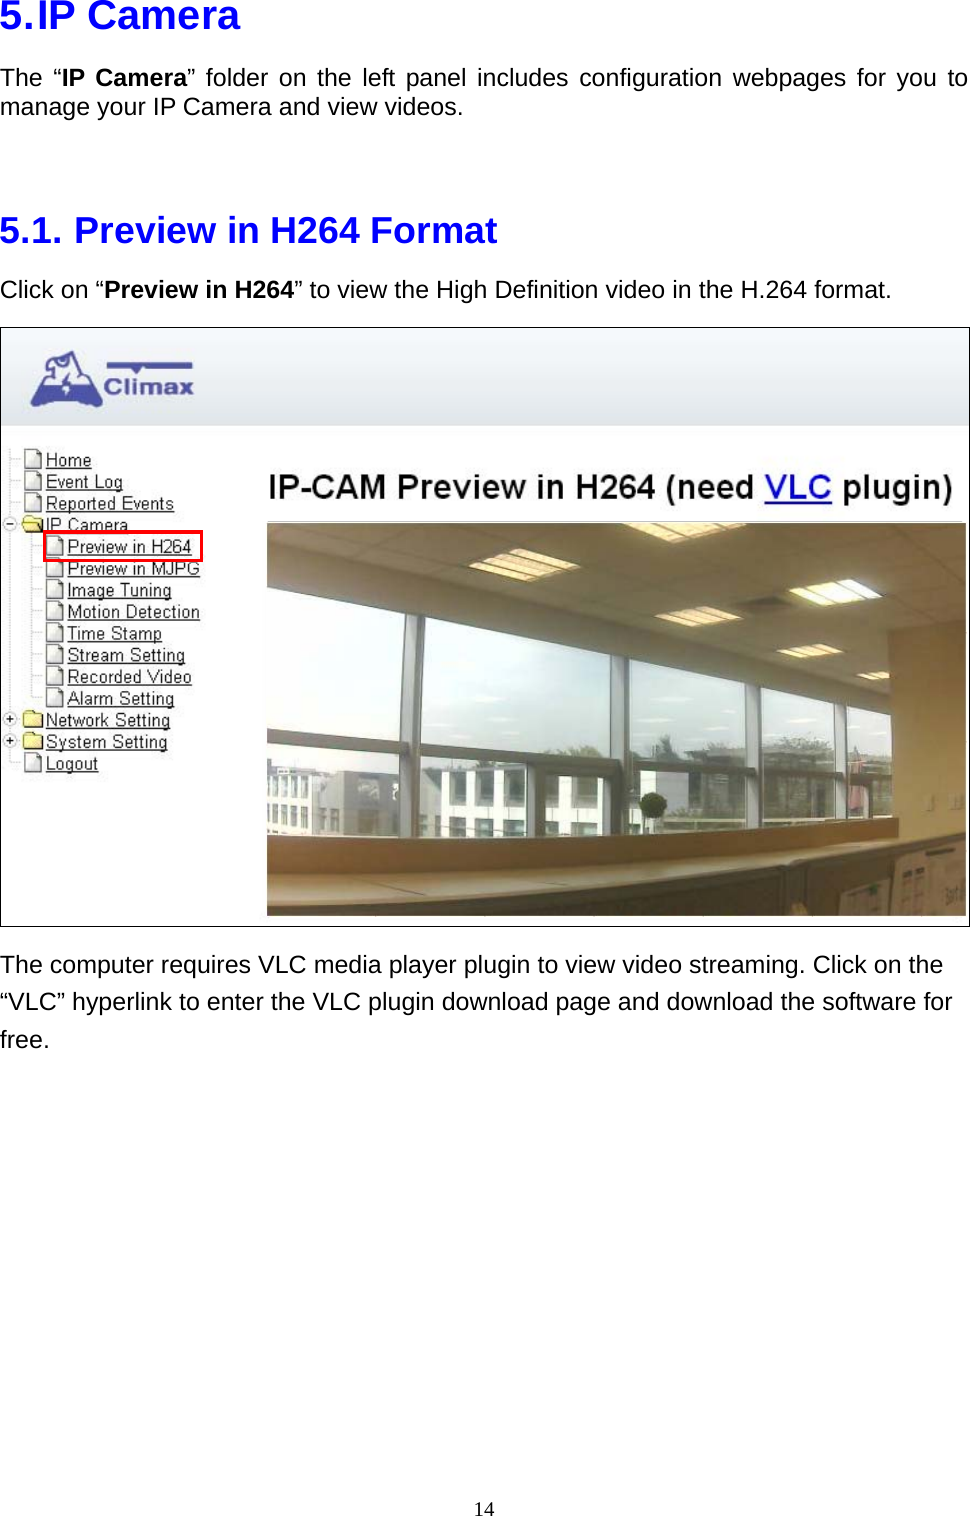 14  5. IP  Camera The “IP Camera” folder on the left panel includes configuration webpages for you to manage your IP Camera and view videos.  5.1. Preview in H264 Format Click on “Preview in H264” to view the High Definition video in the H.264 format.  The computer requires VLC media player plugin to view video streaming. Click on the “VLC” hyperlink to enter the VLC plugin download page and download the software for free.  